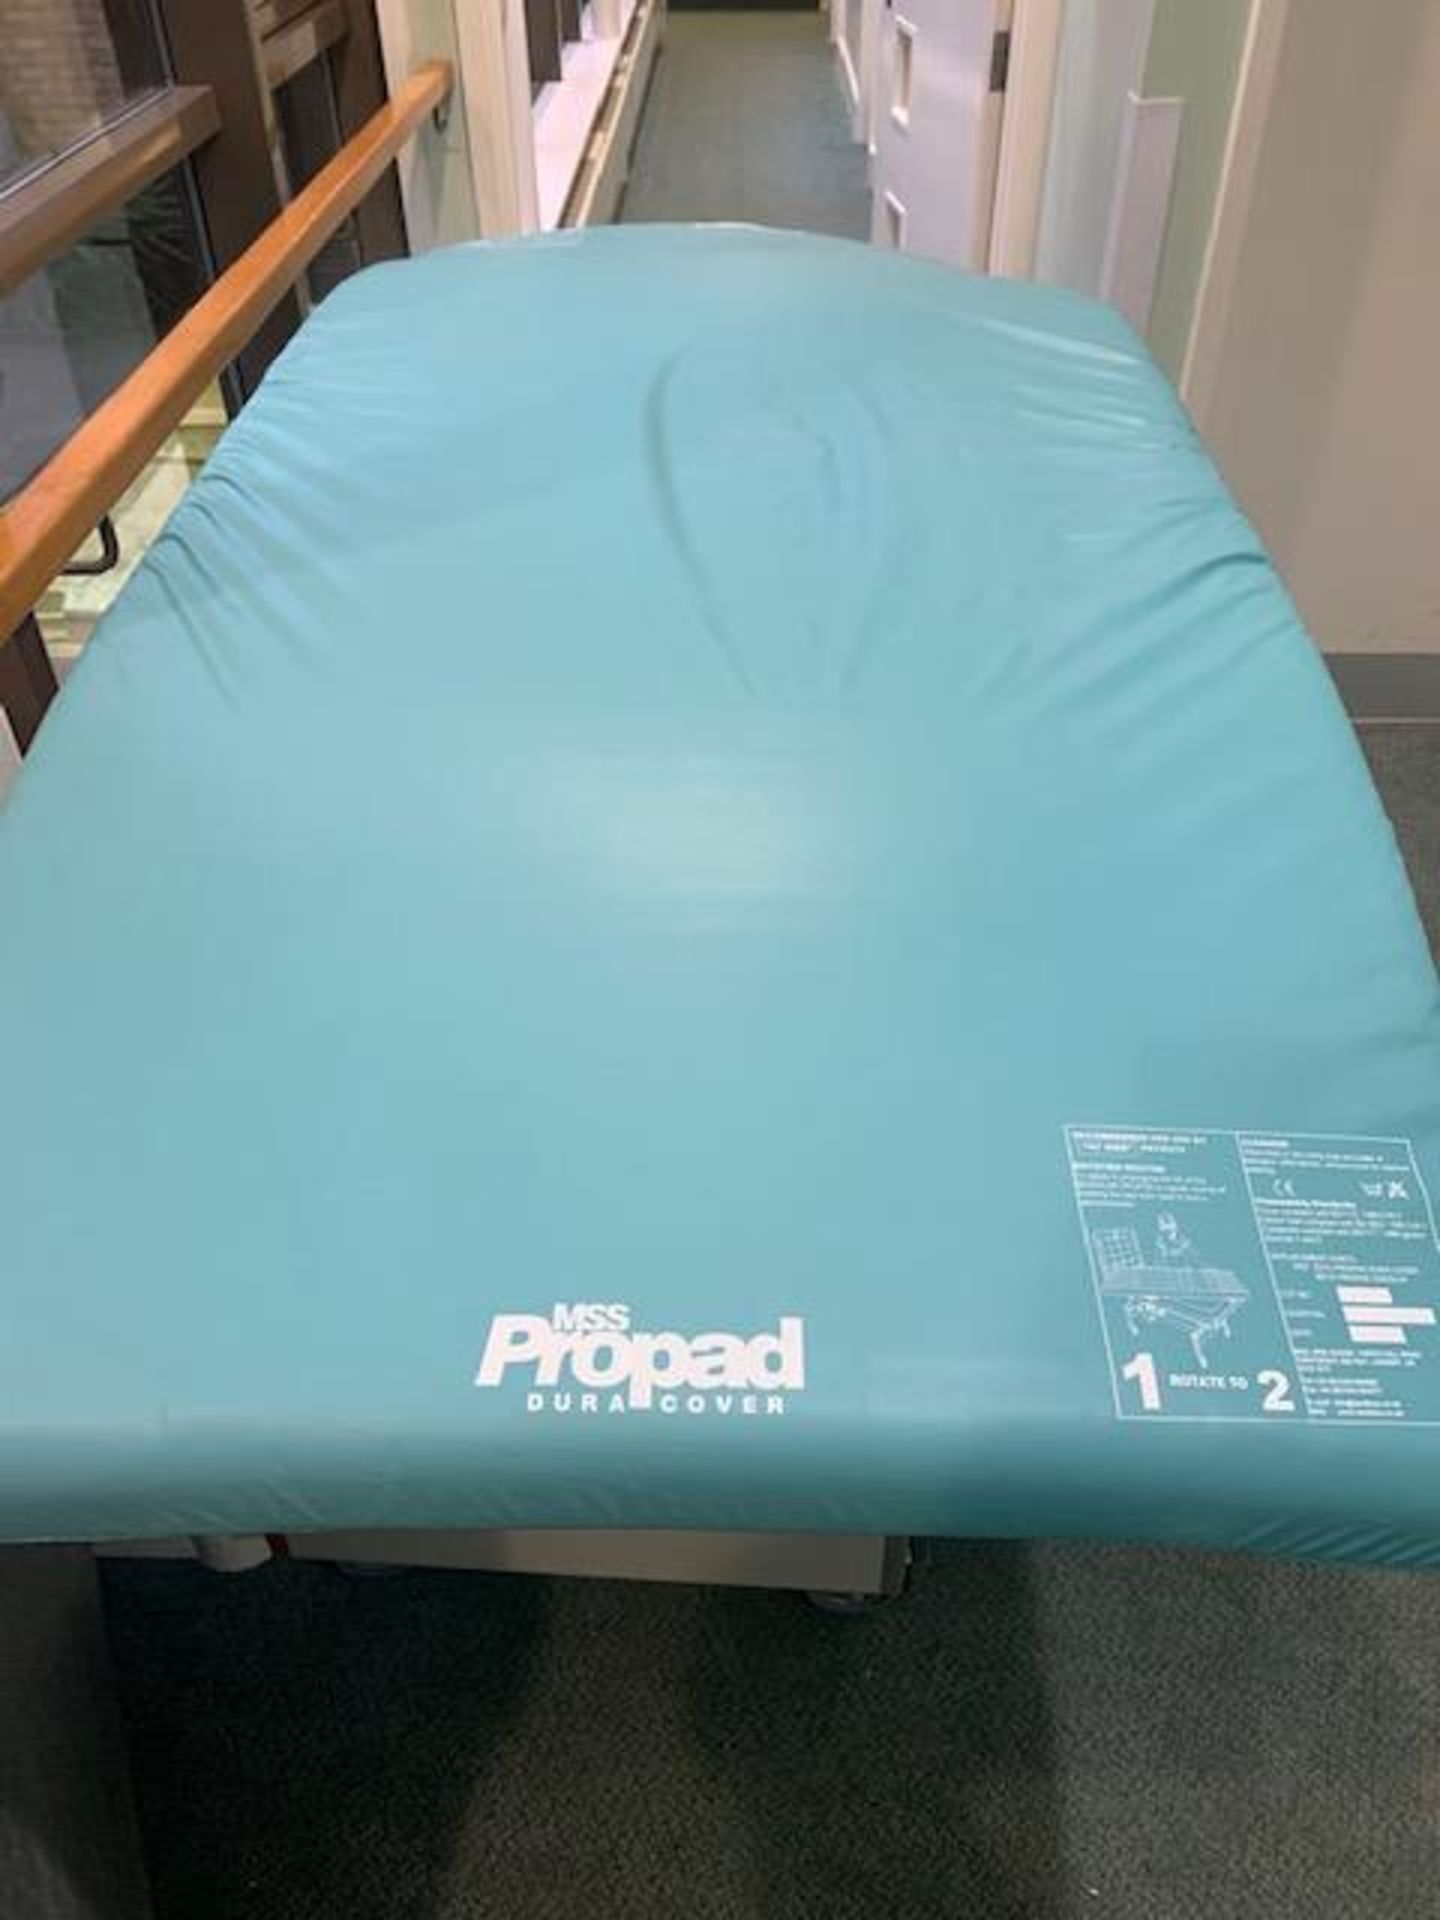 Two MSS Propad Dura Covers medical mattress overlays - Image 2 of 2